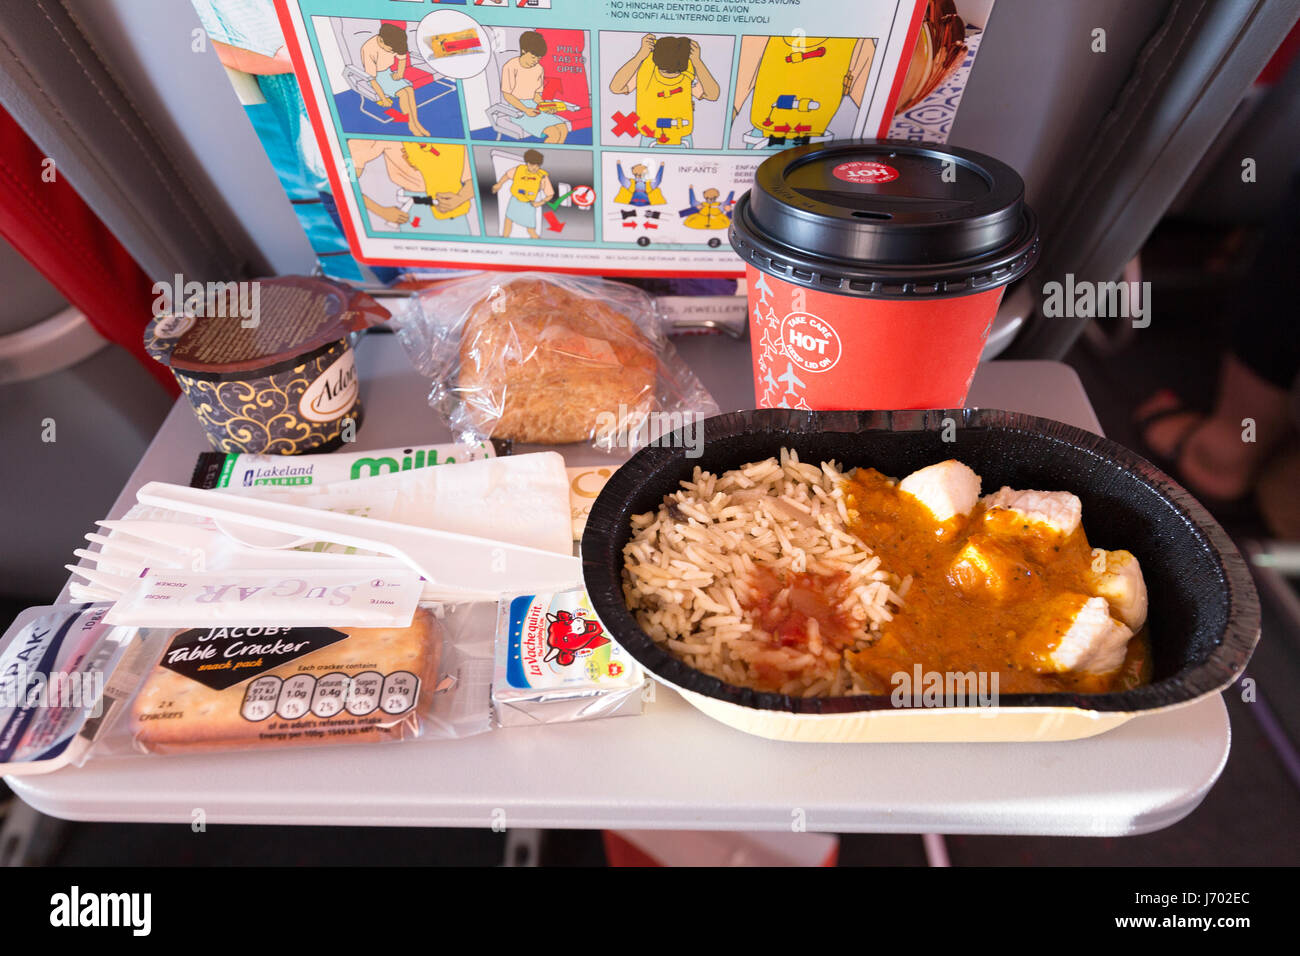 Airline food - a meal tray, Jet2 airline, on a 737-800 plane, flight from Lanzarote to UK Stock Photo